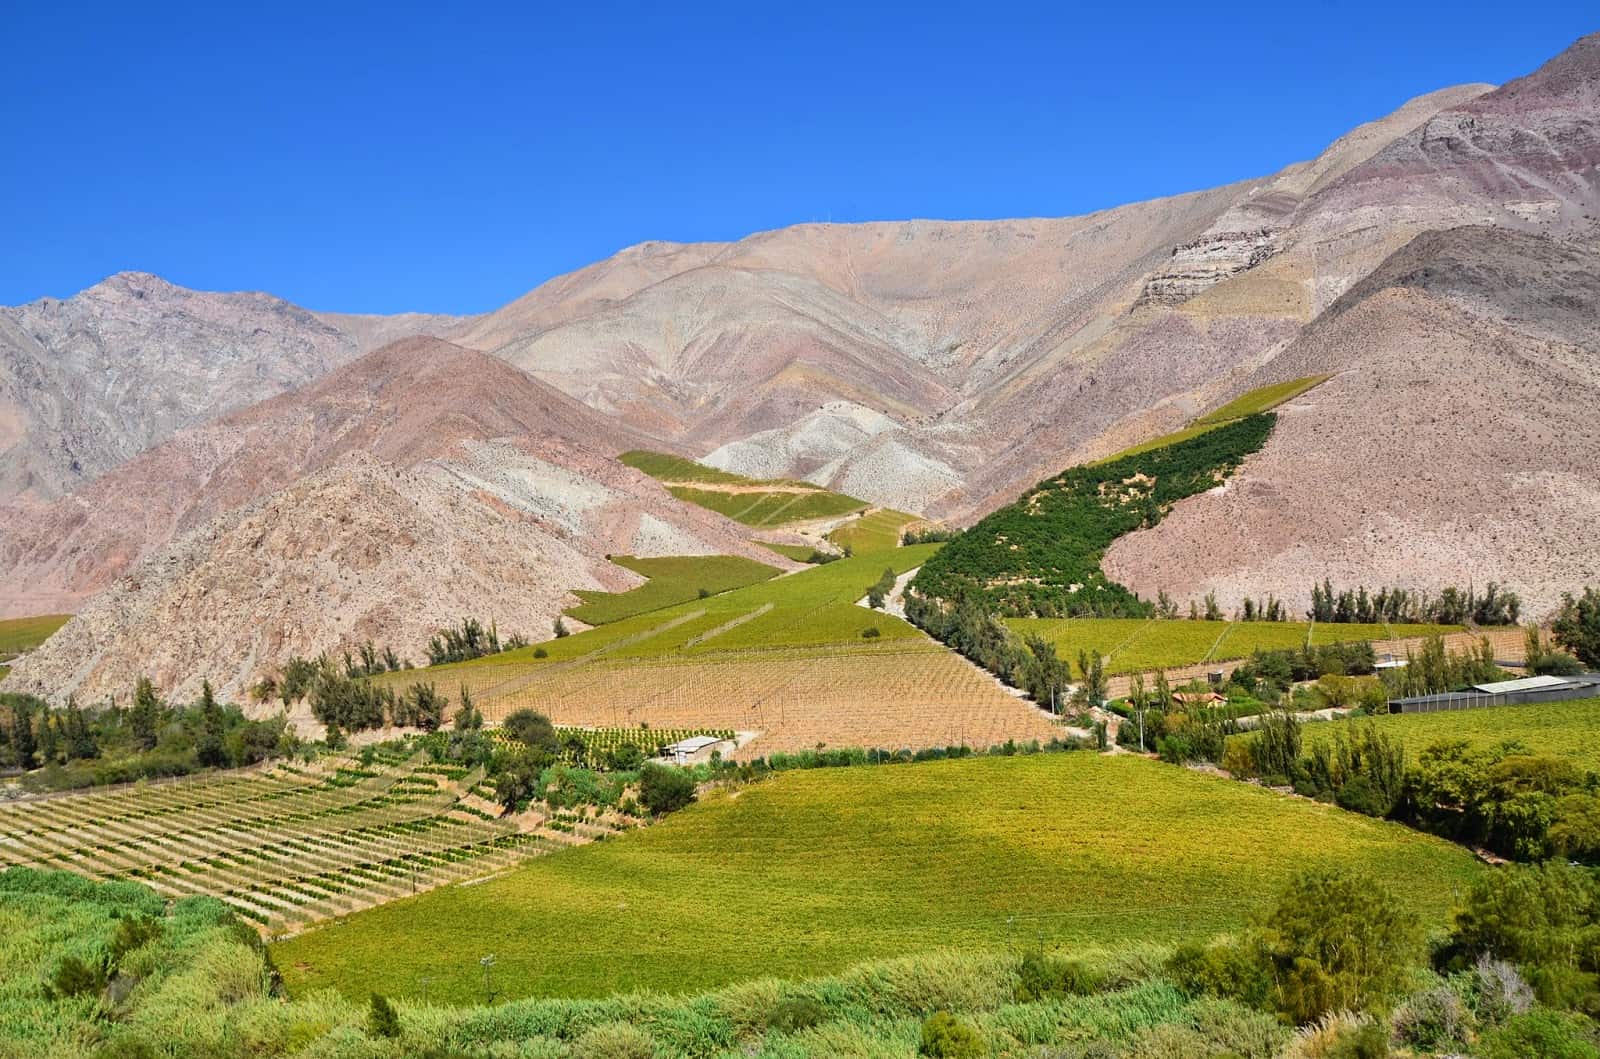 Elqui Valley, Chile